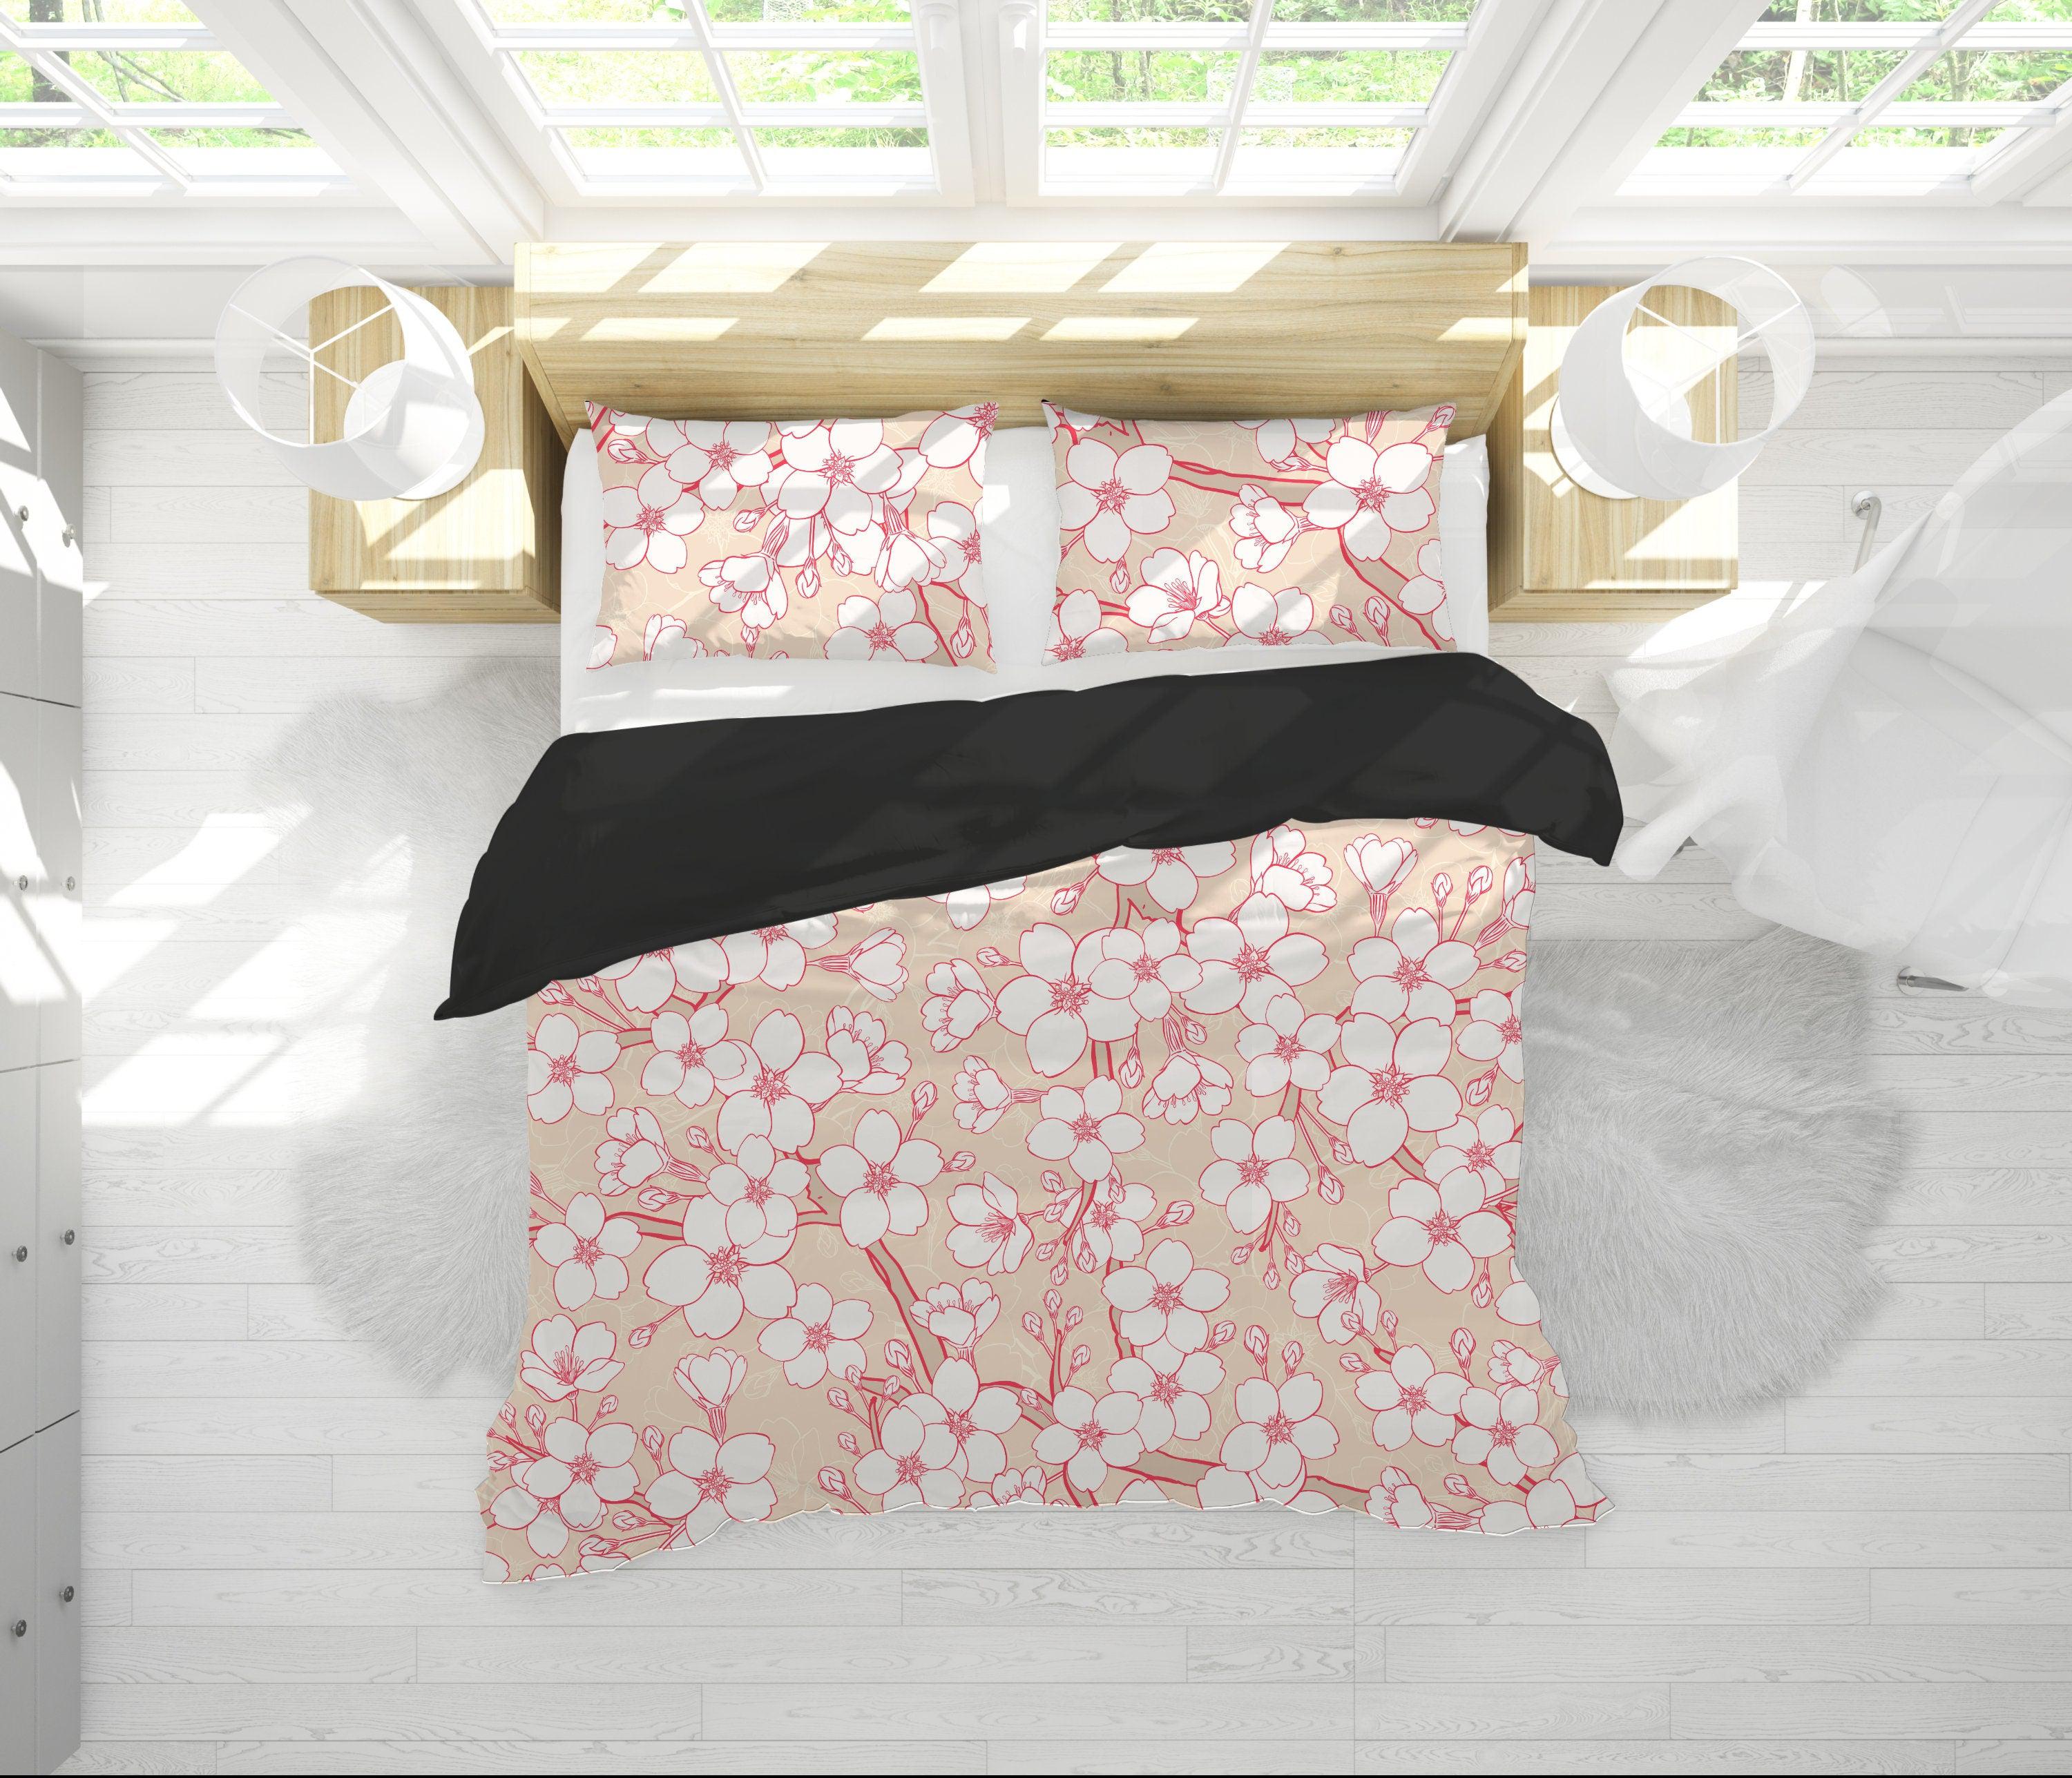 daintyduvet Cream Beige Bedding Set with Floral Prints | Cherry Blossoms Duvet Cover Set with Pillows